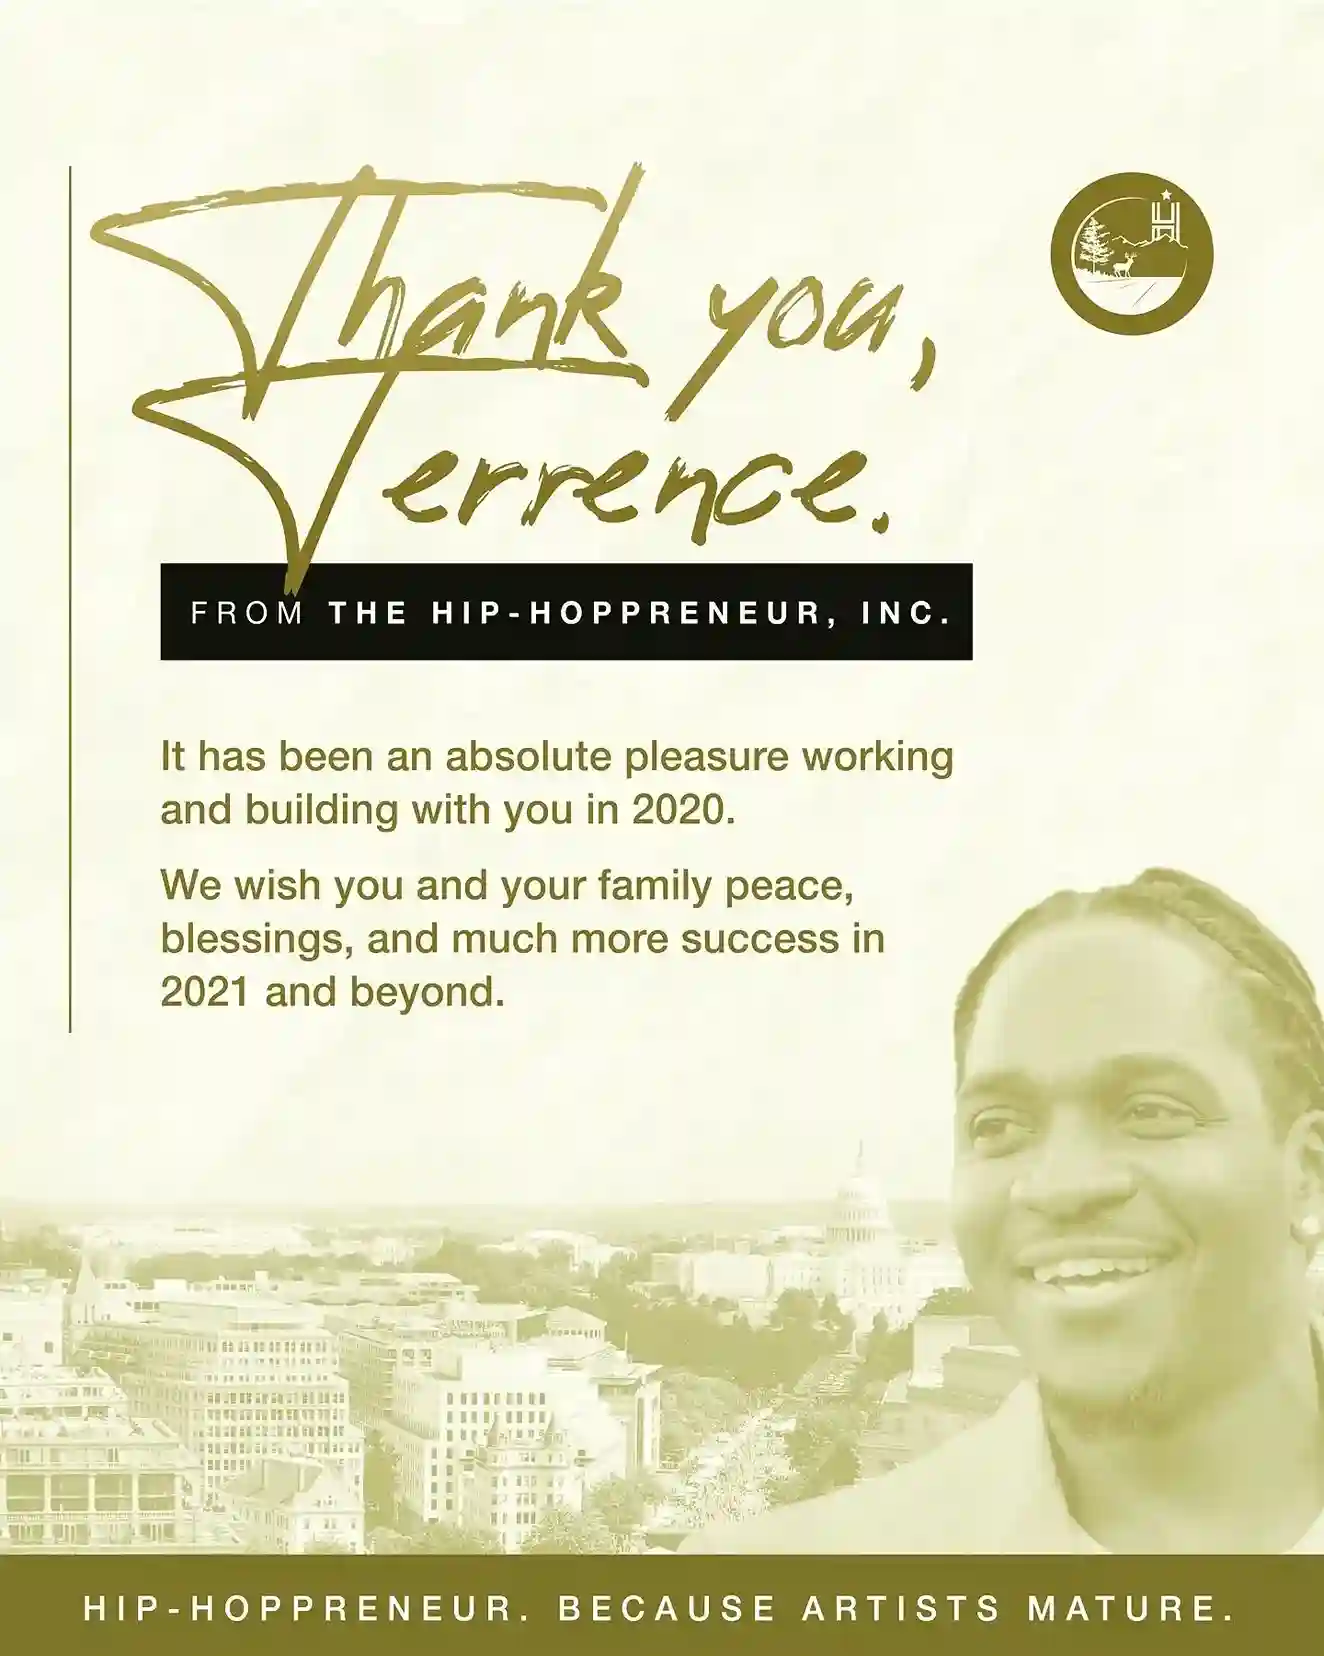 A 2020 HipHoppreneur appreciation poster featuring Terrence 'Pusha T' Thornton, expressing gratitude for their collaboration and wishing him and his family continued success in 2021 and beyond.